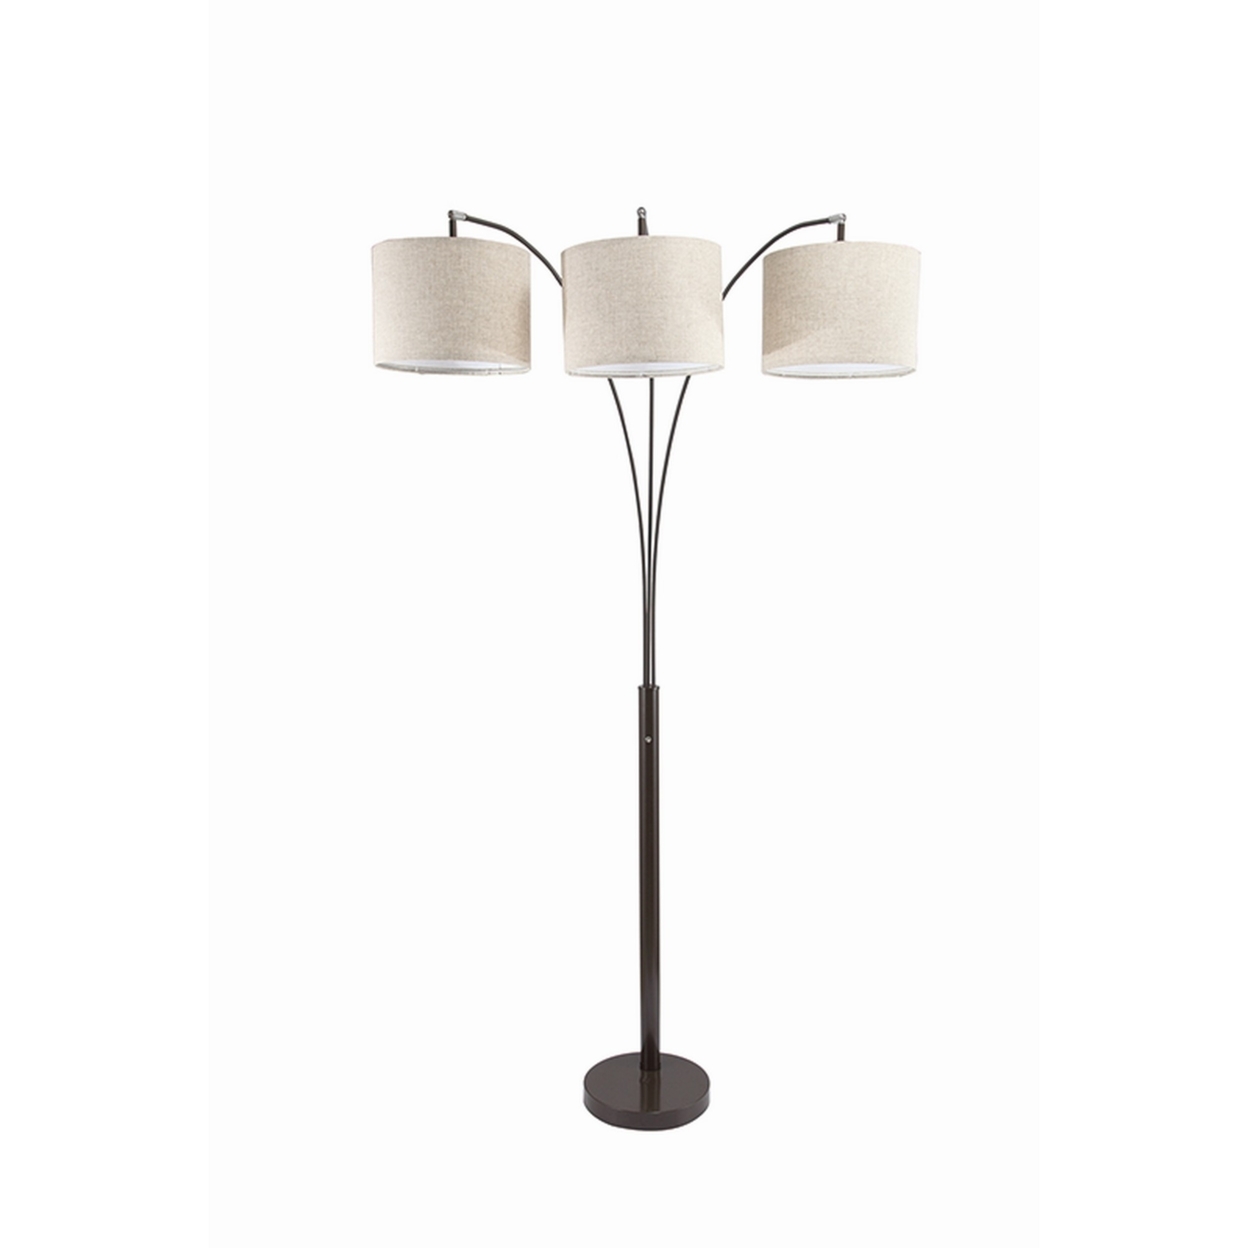 Floor Lamp With 3 Arched Arms And Fabric Shades, Bronze- Saltoro Sherpi